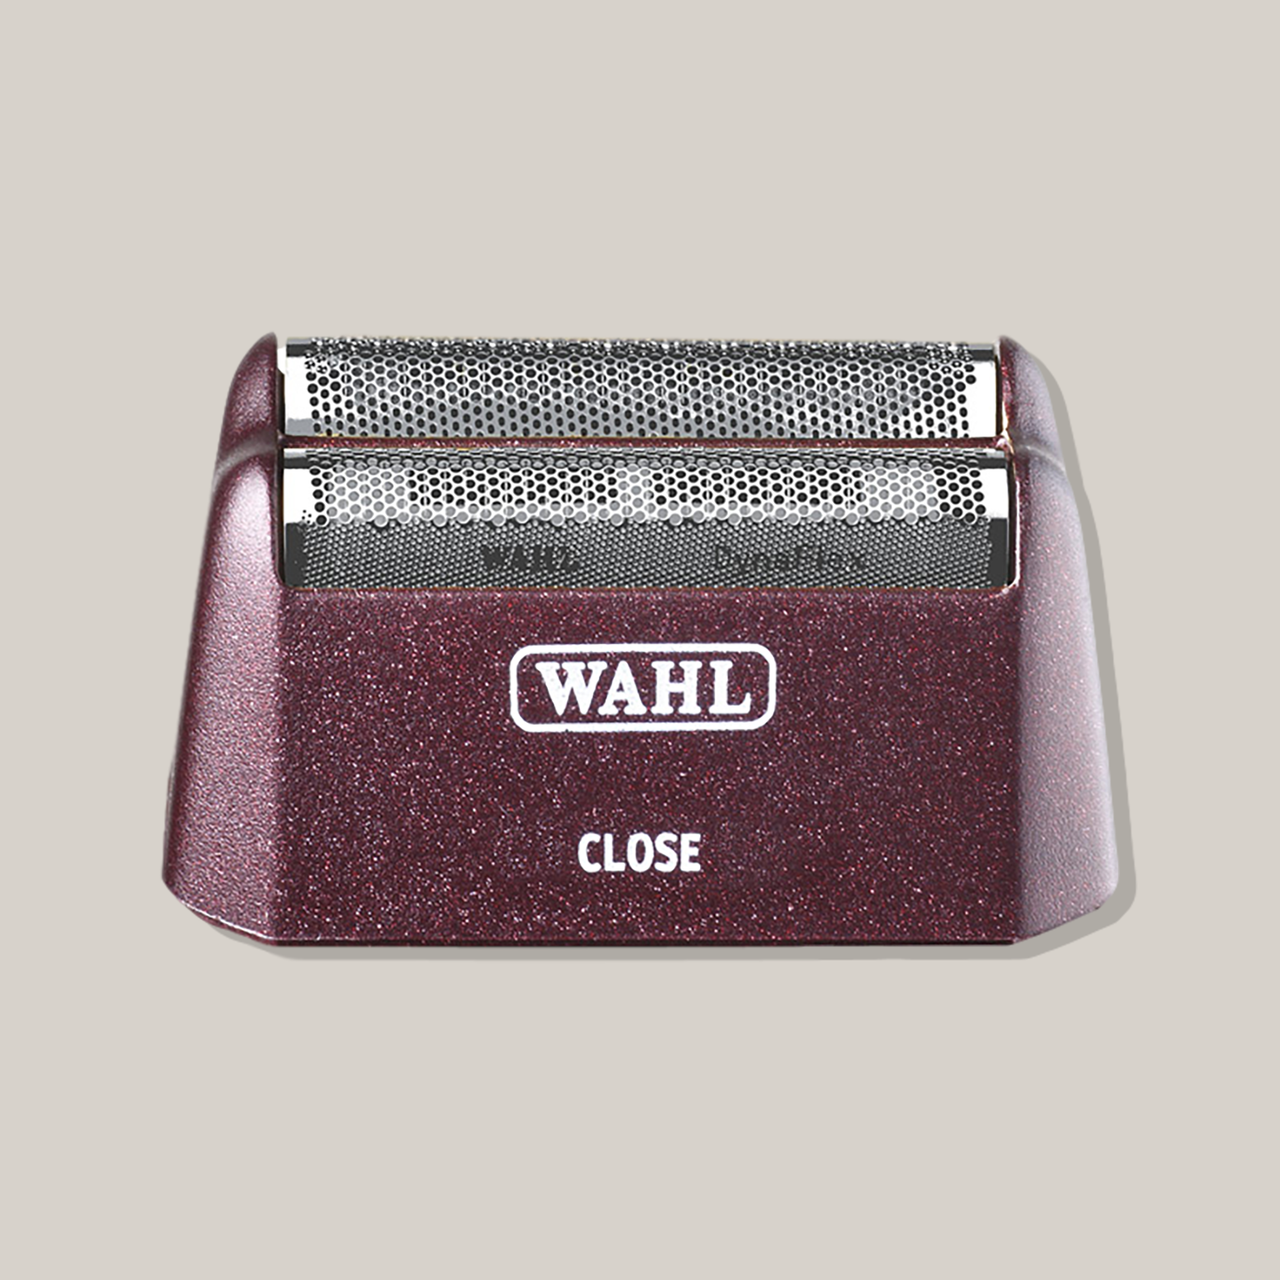 Wahl 5 Star silver replacement foil #53238 